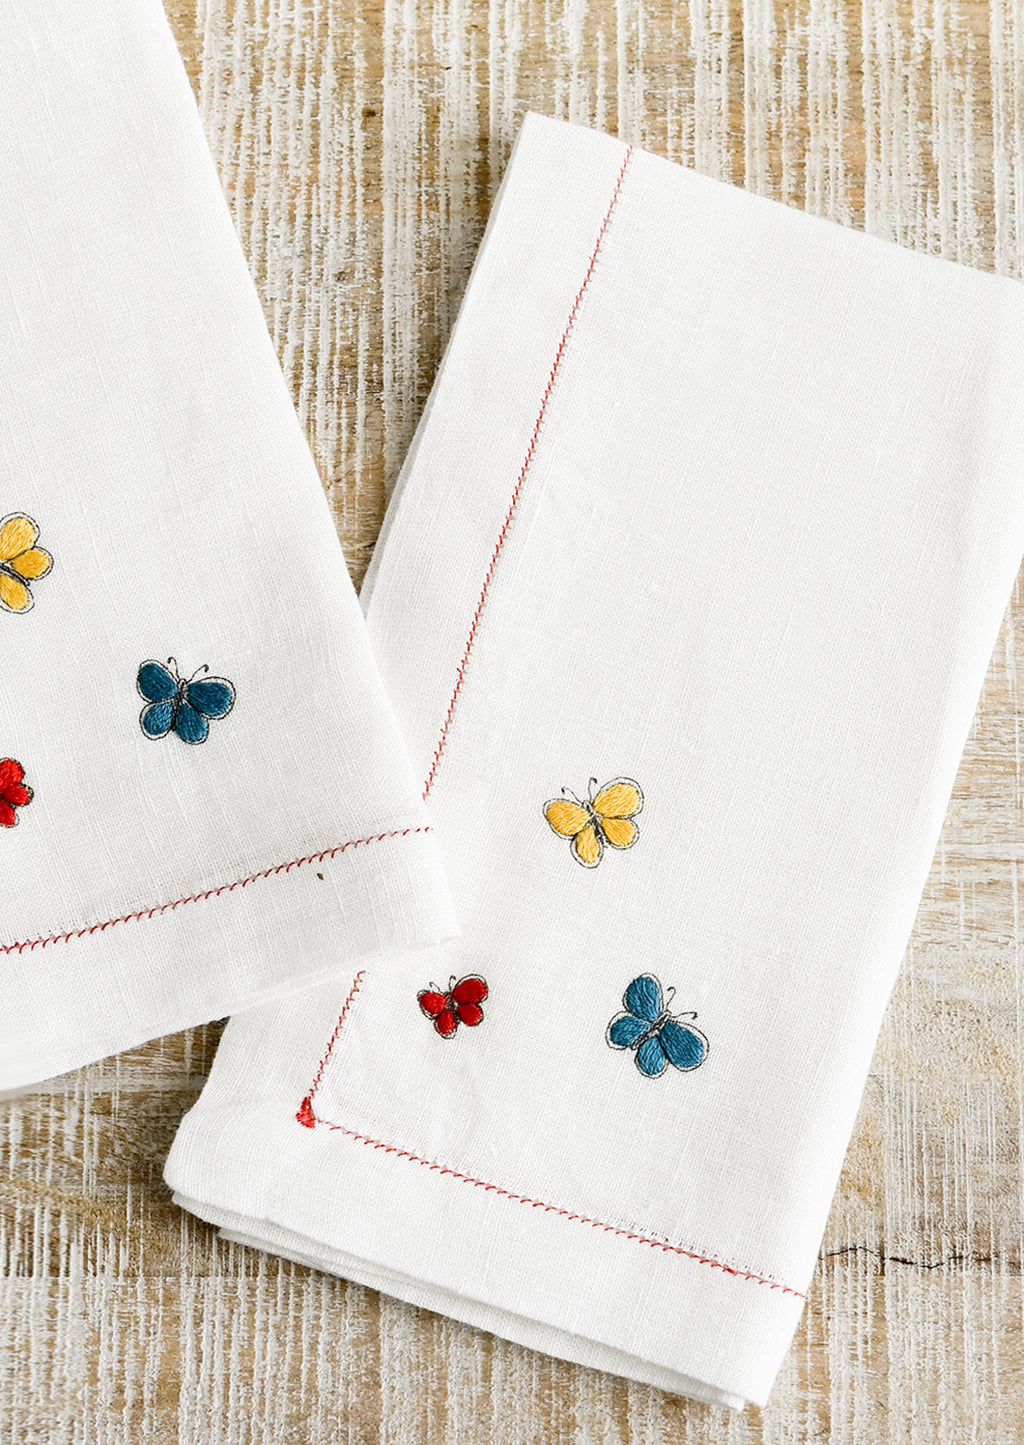 Primary Multi: White linen napkins with primary colored butterfly embroidery.